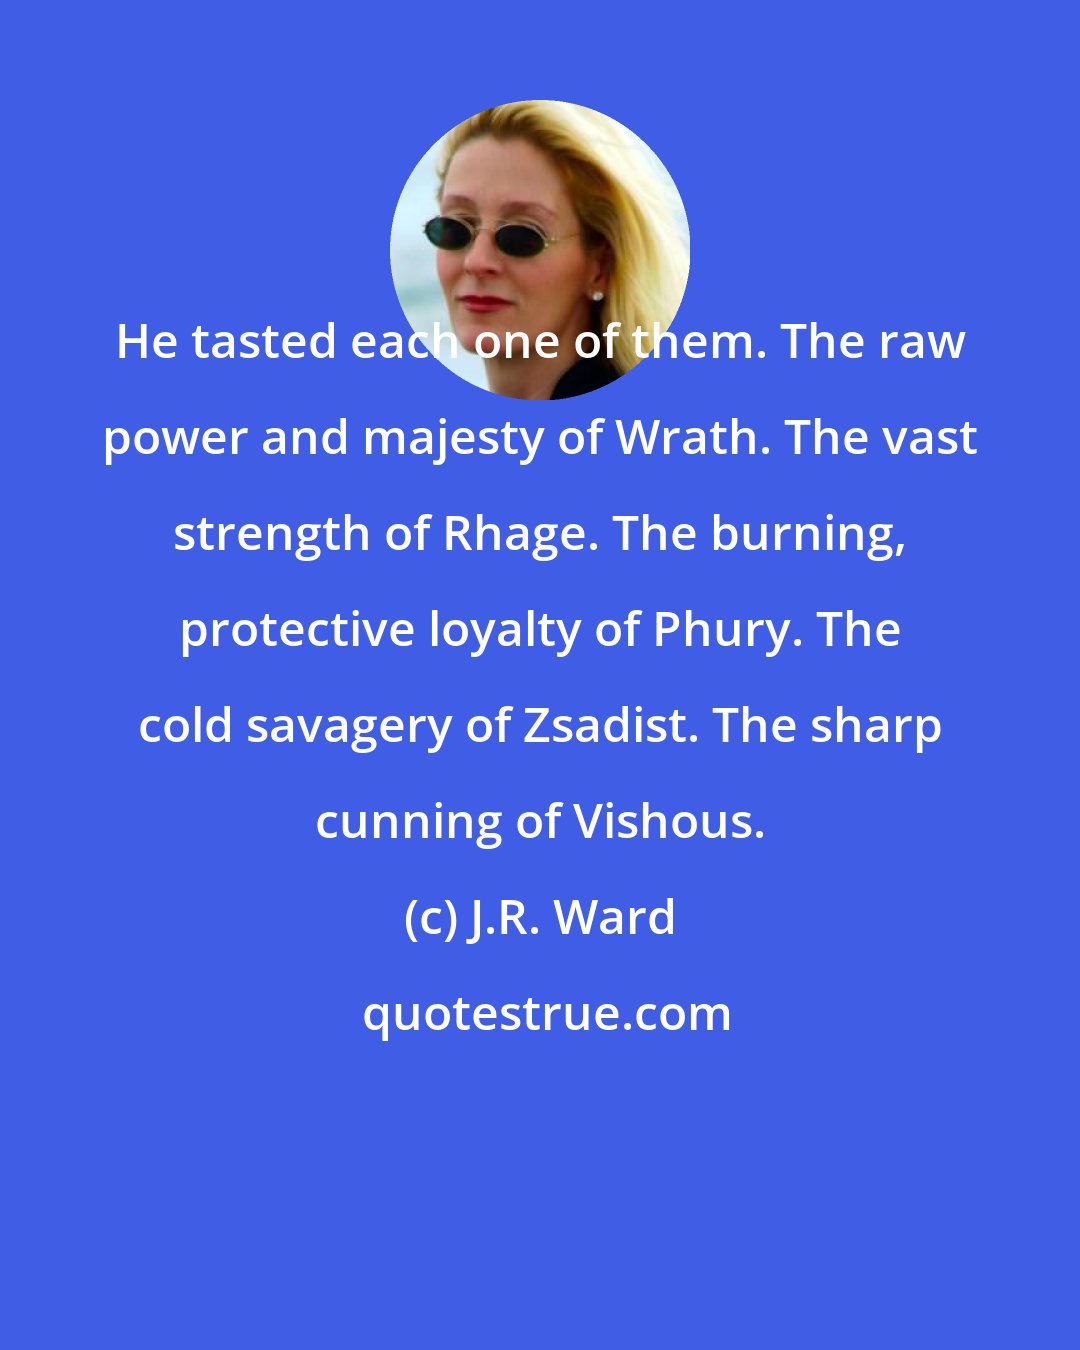 J.R. Ward: He tasted each one of them. The raw power and majesty of Wrath. The vast strength of Rhage. The burning, protective loyalty of Phury. The cold savagery of Zsadist. The sharp cunning of Vishous.